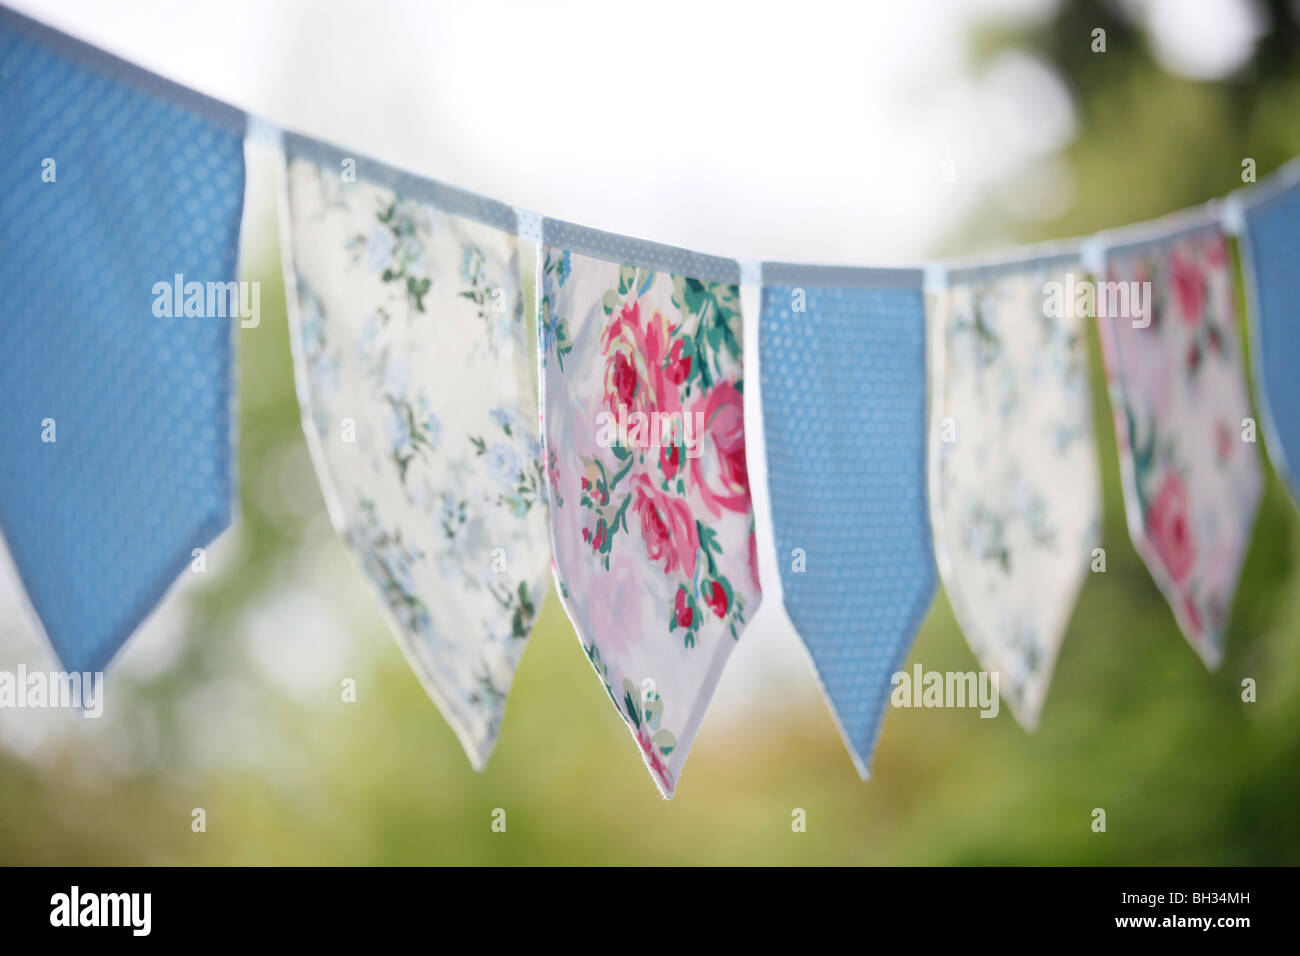 Fabric Bunting in a garden Stock Photo